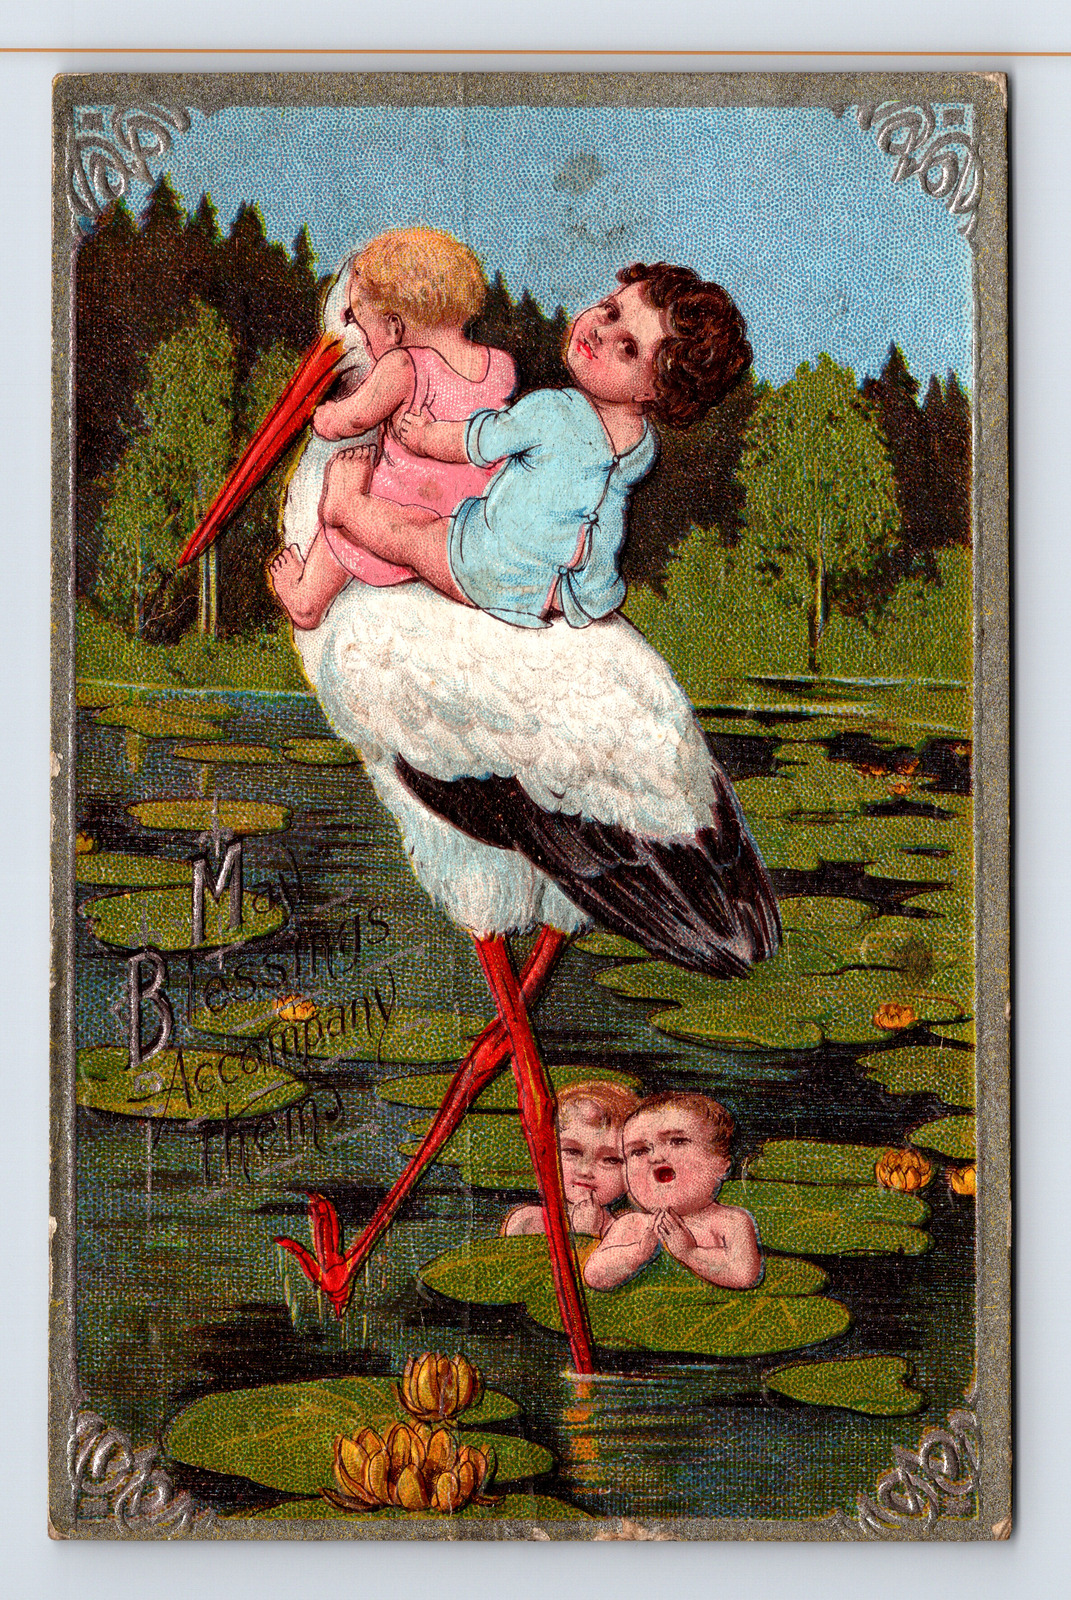 c1913 DB Postcard Blessings Babies Riding in On Stork Birth Theme